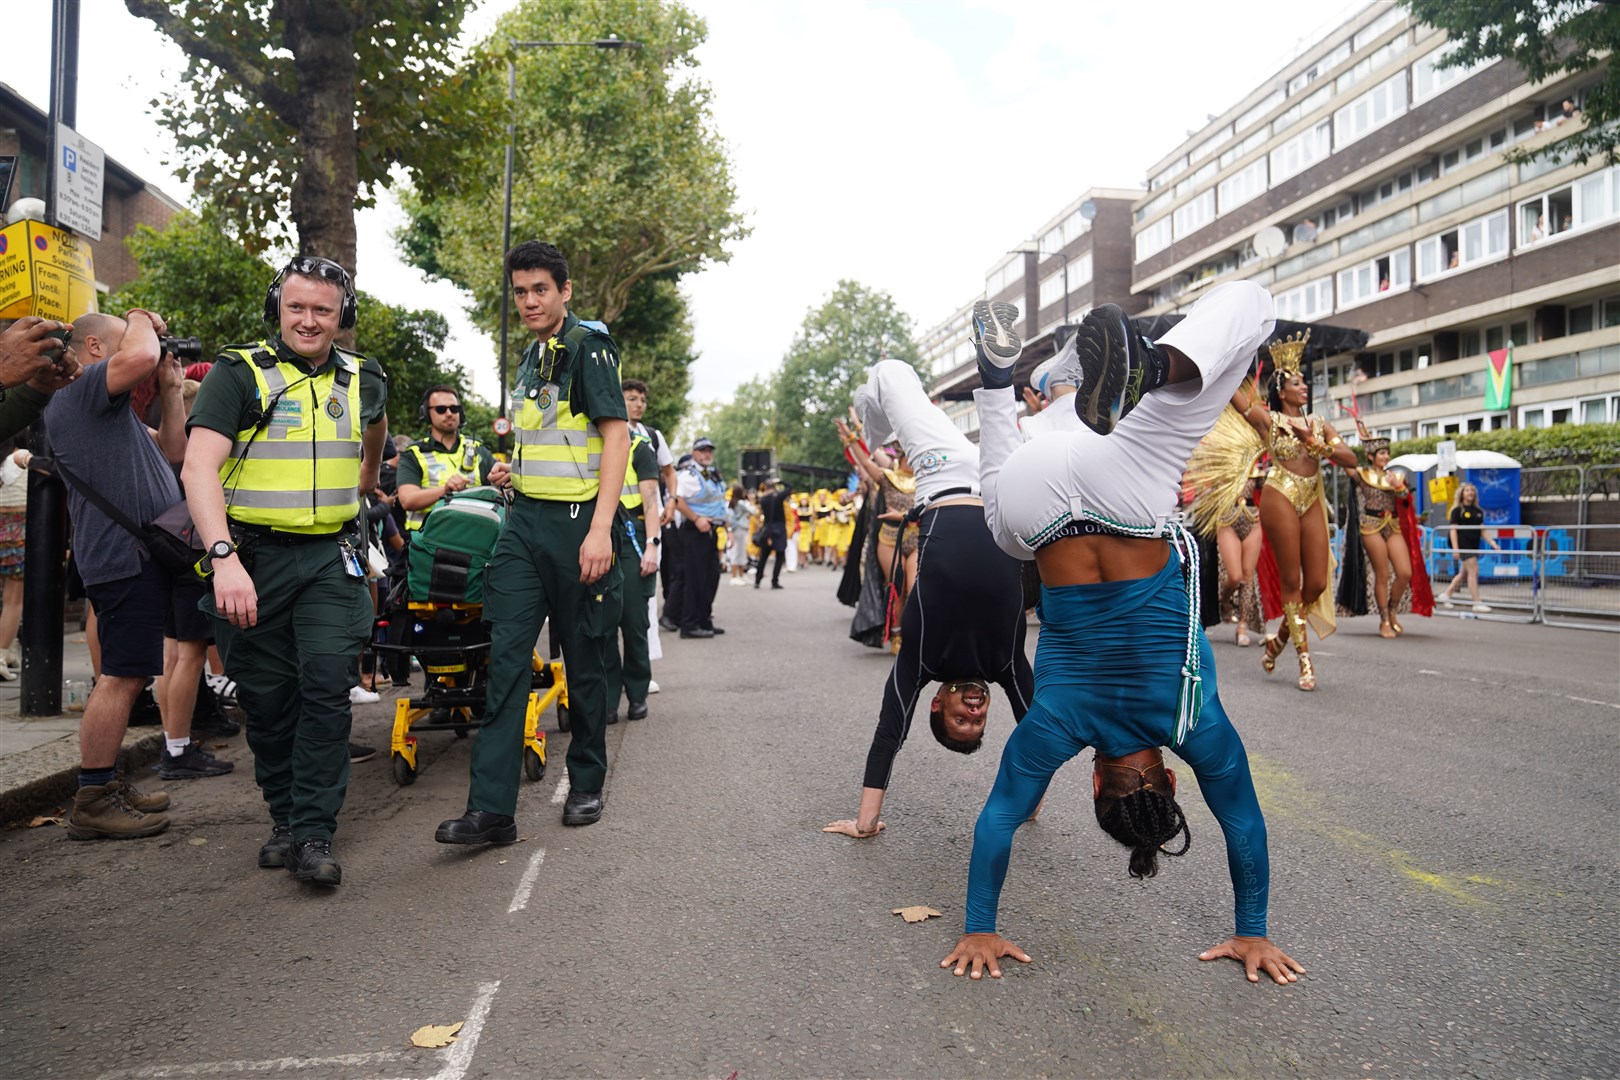 Paramedics pass participants in the Notting Hill Carnival (James Manning/PA)